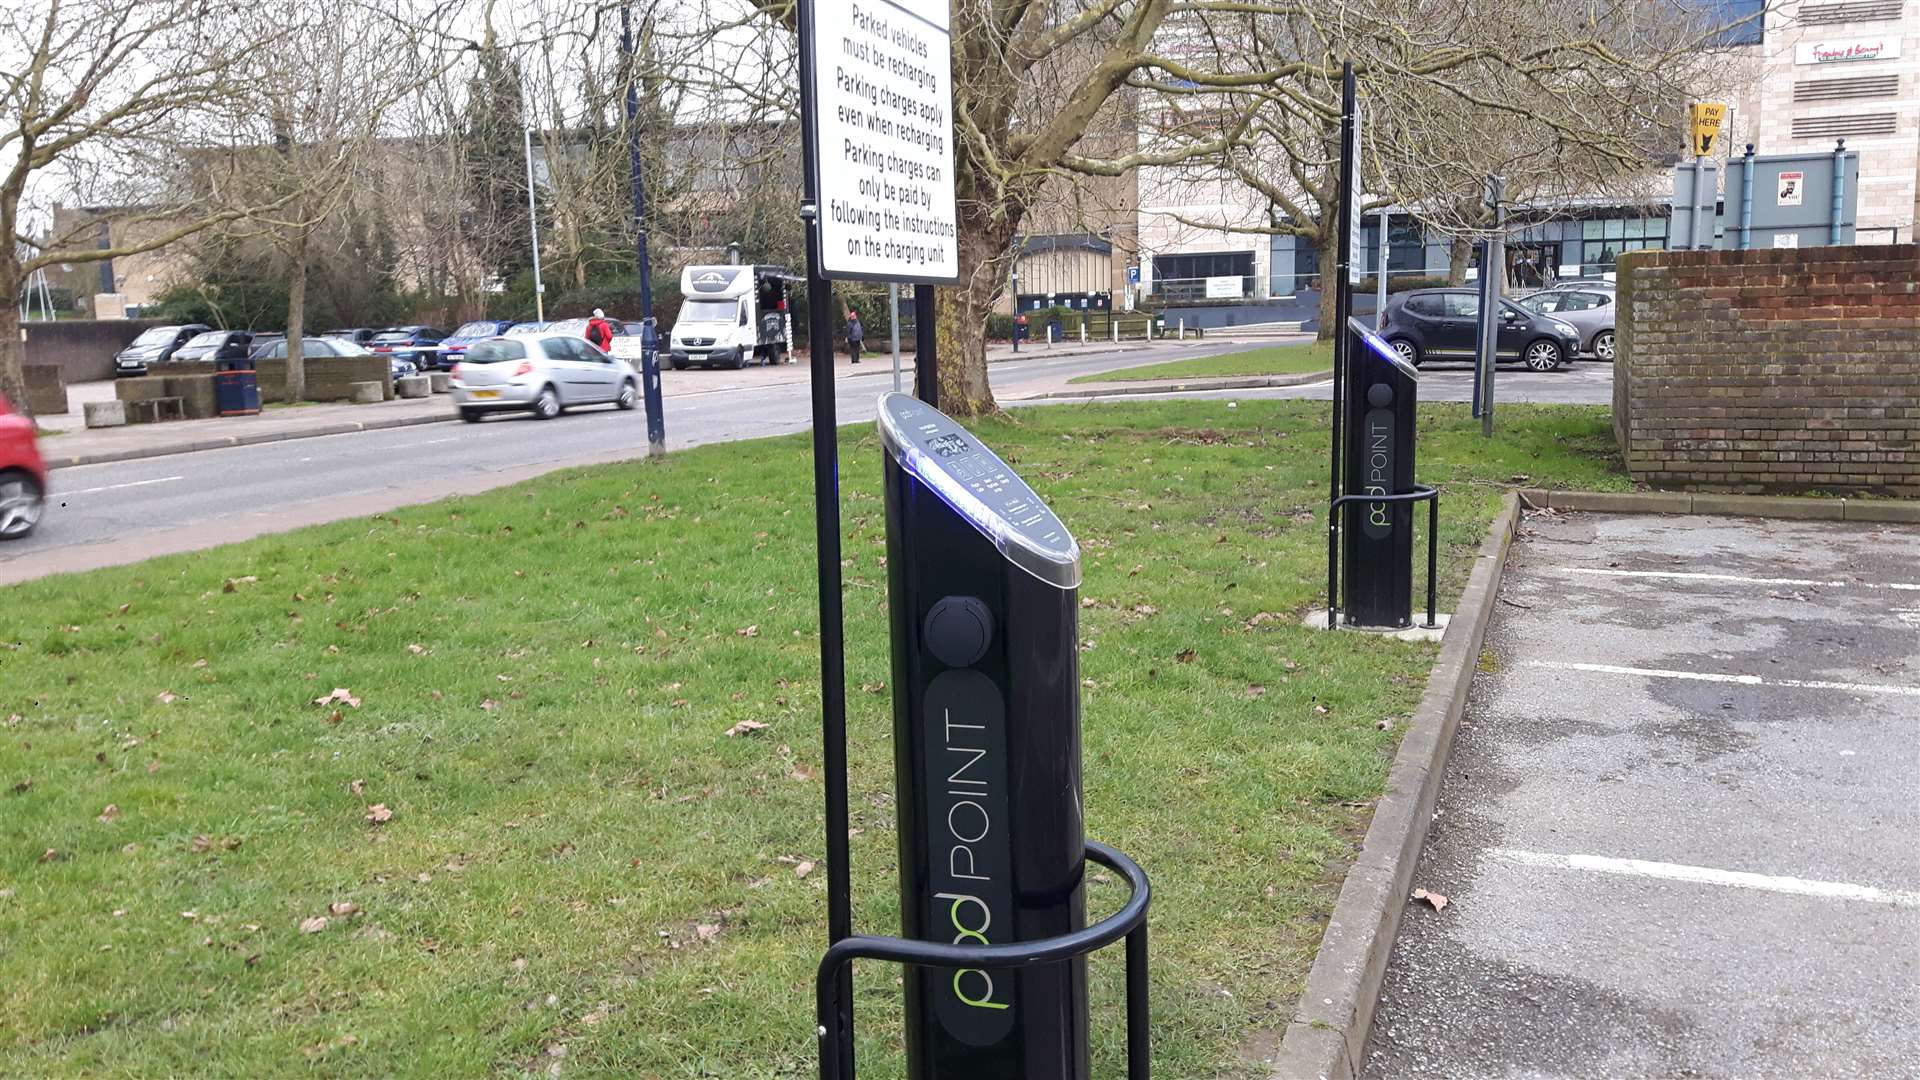 Maidstone council electric car charging parking space in Barker Road car park Maidstone